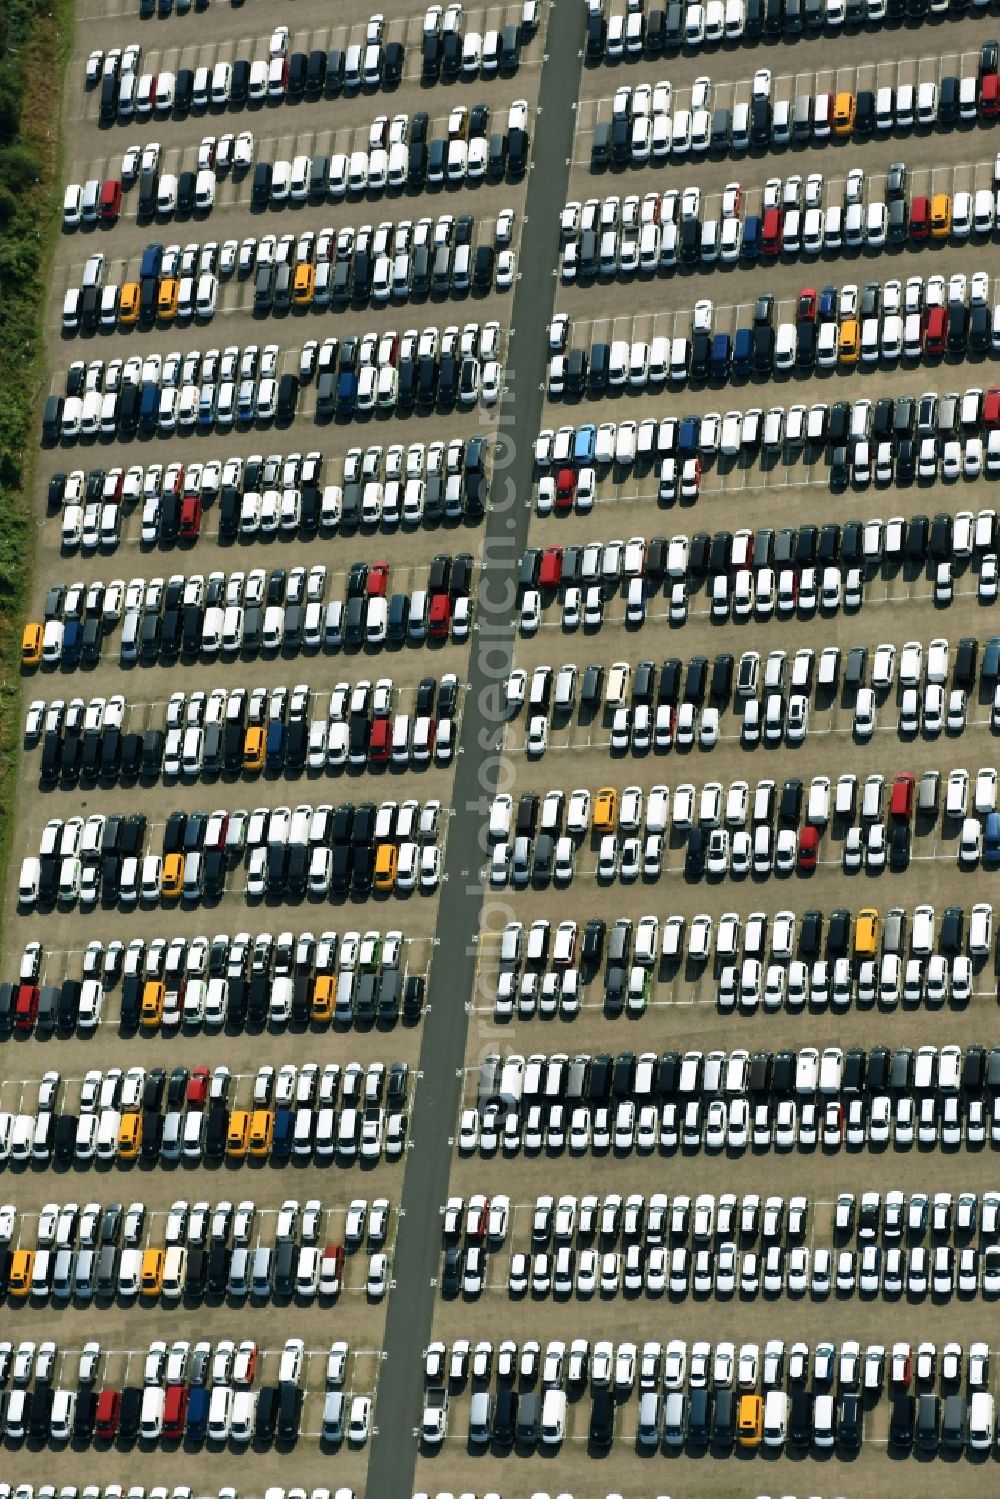 Lehrte from above - Parking and storage space of the Volkswagen Automobile Region Hannover Betrieb Lehrte for automobiles in Lehrte in the state Lower Saxony